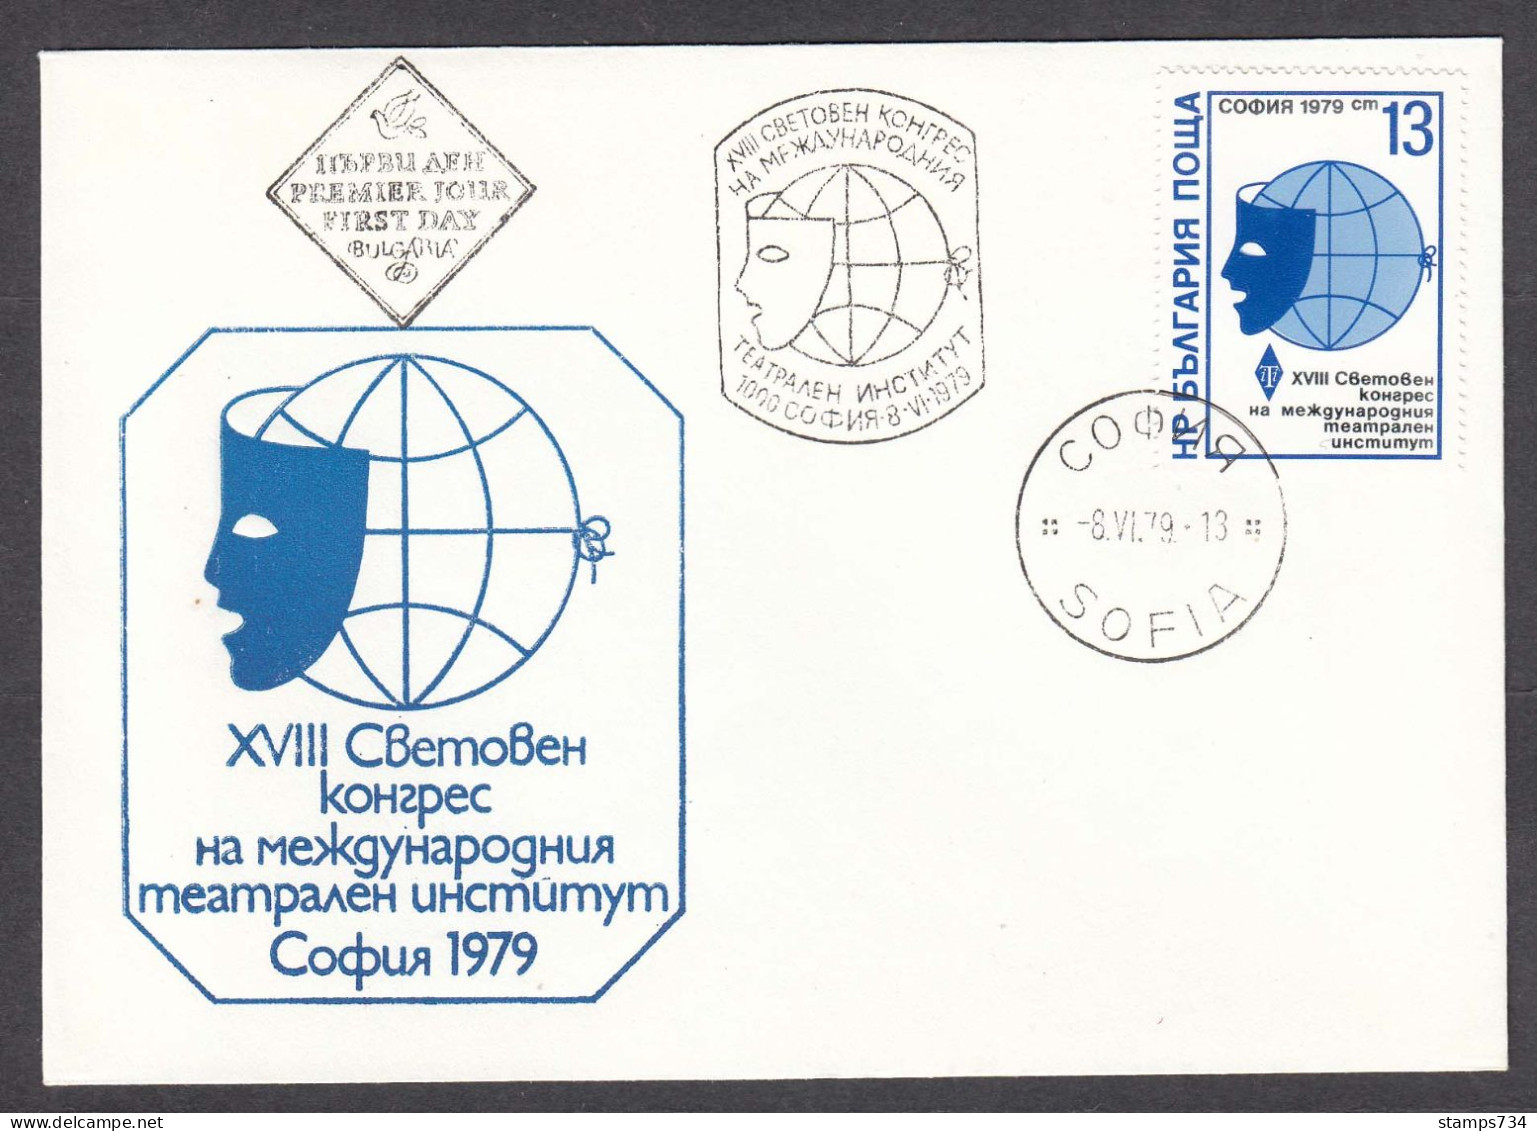 Bulgaria 1979 - Congress Of The International Institute For Theater Studies, Mi-Nr. 2797, FDC - FDC